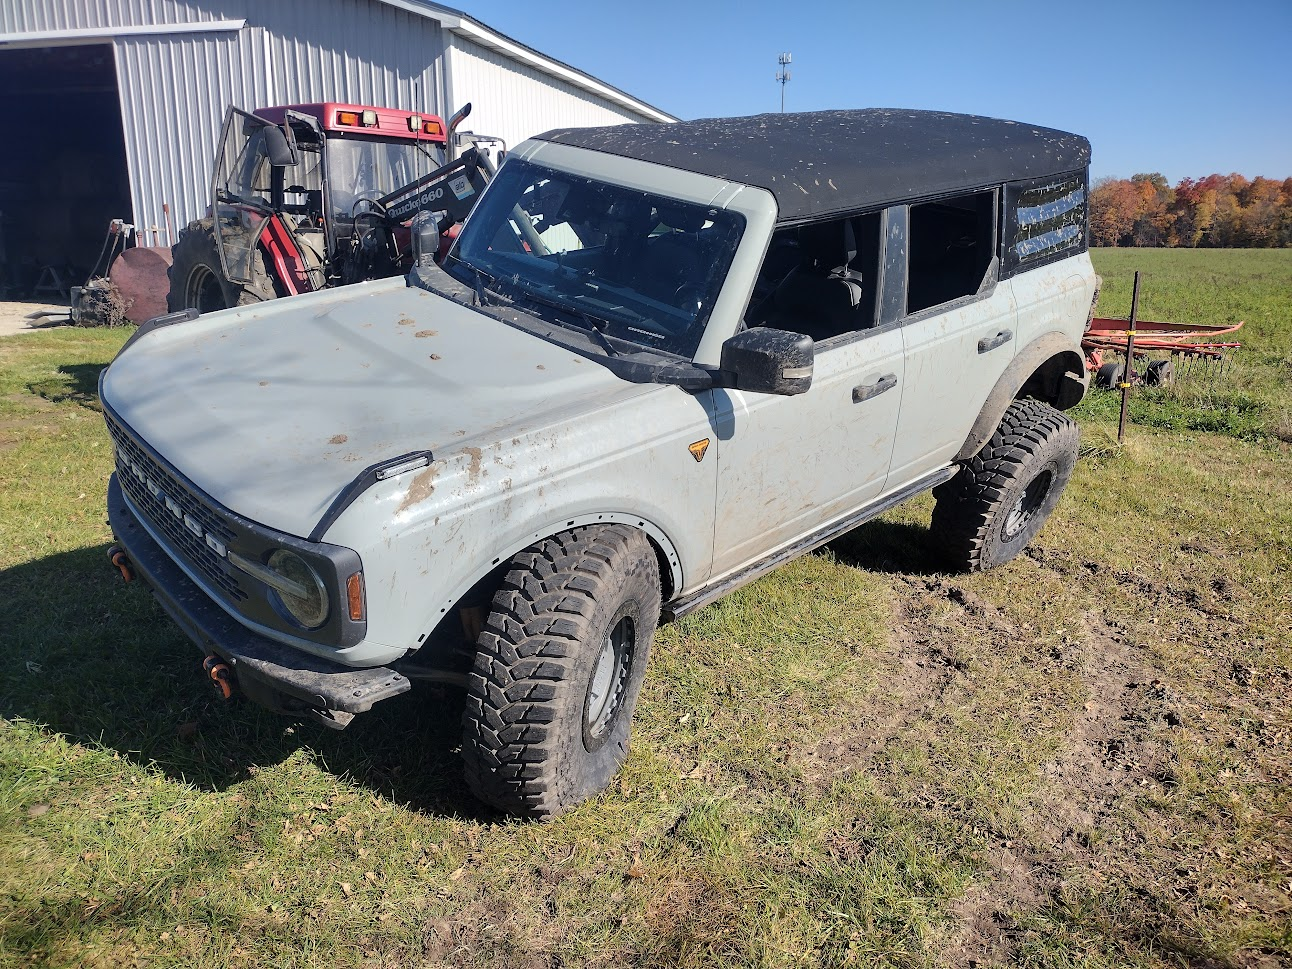 Ford Bronco 37" Tires on a Non-Sasquatch Badlands - My Experience, Results, Pics 1666477480855